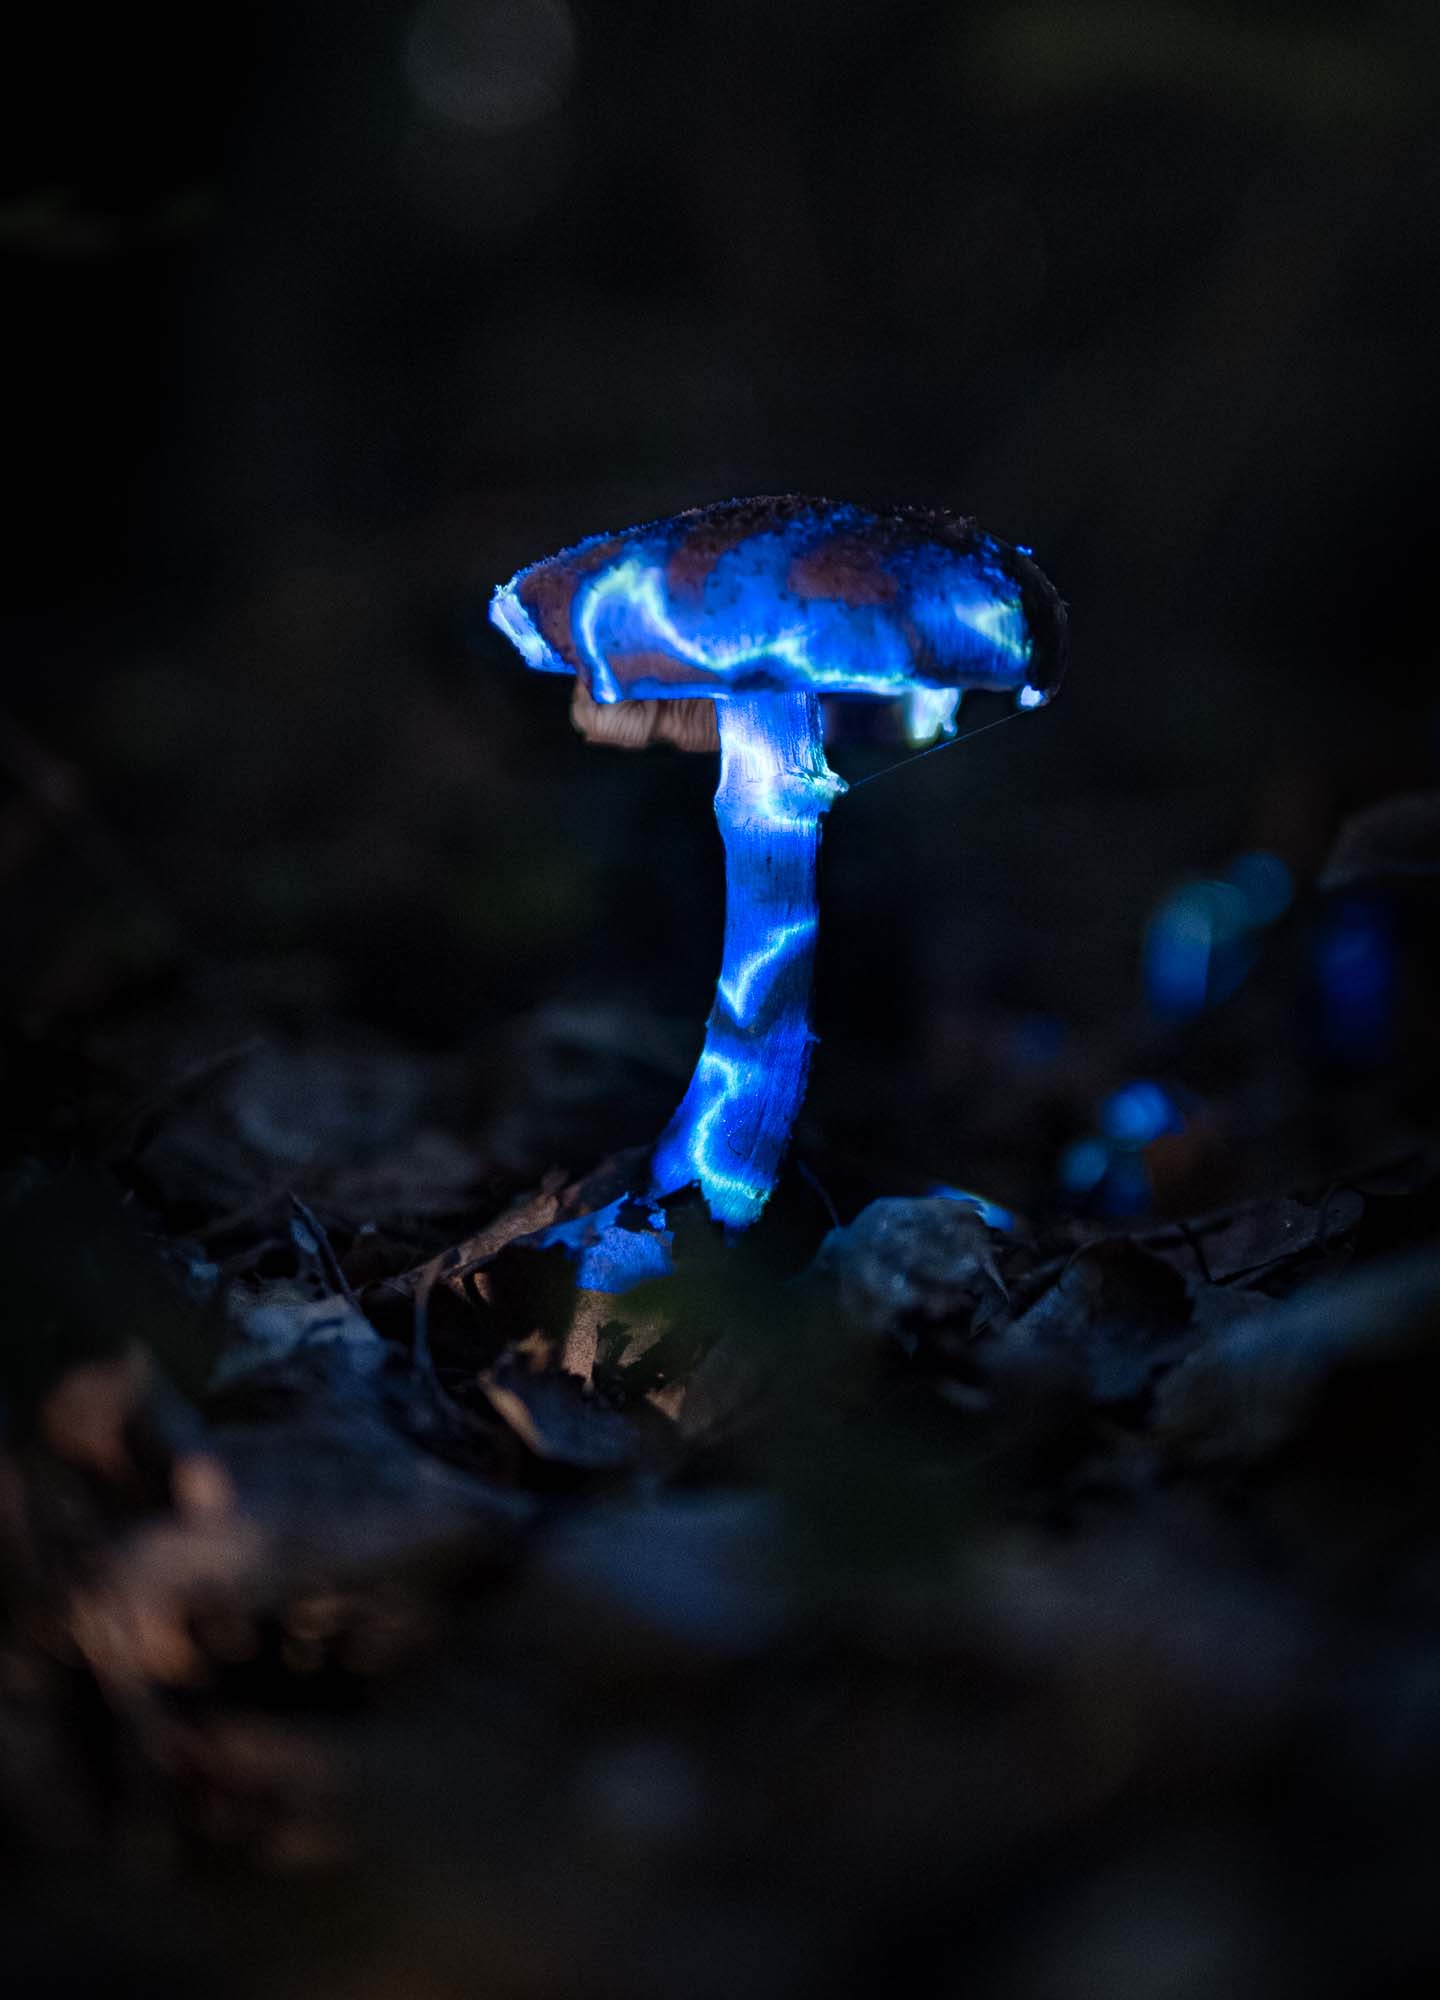 Video projection with blue geometric visuals on a Mushroom